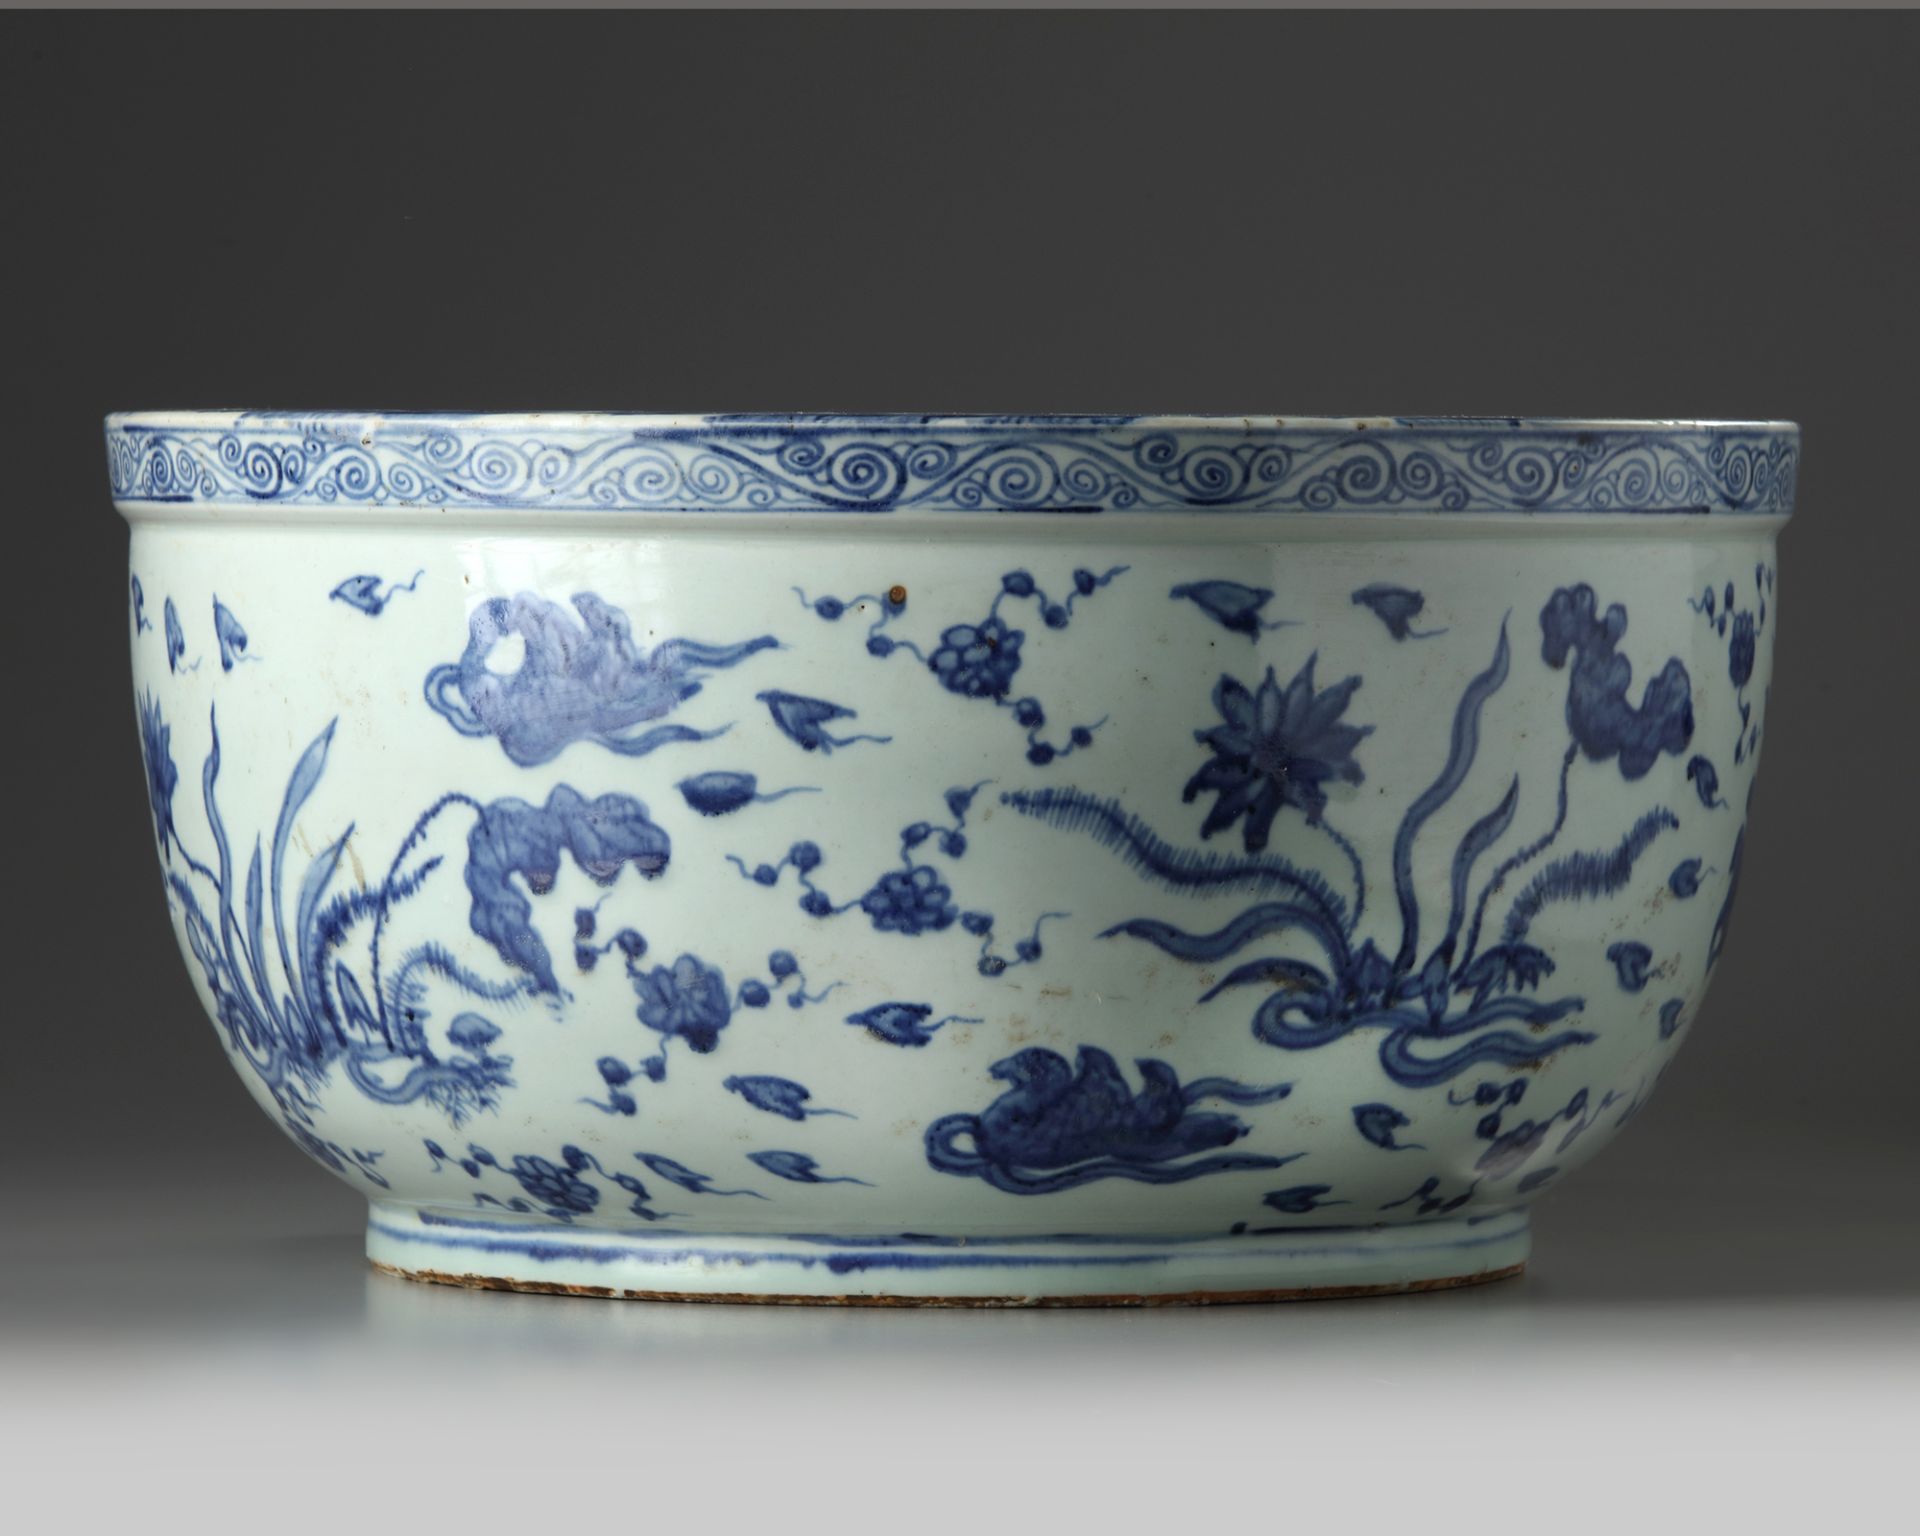 A CHINESE BLUE AND WHITE DUCKS AND LOTUS' BASIN, MING DYNASTY (1368-1644) - Image 5 of 6